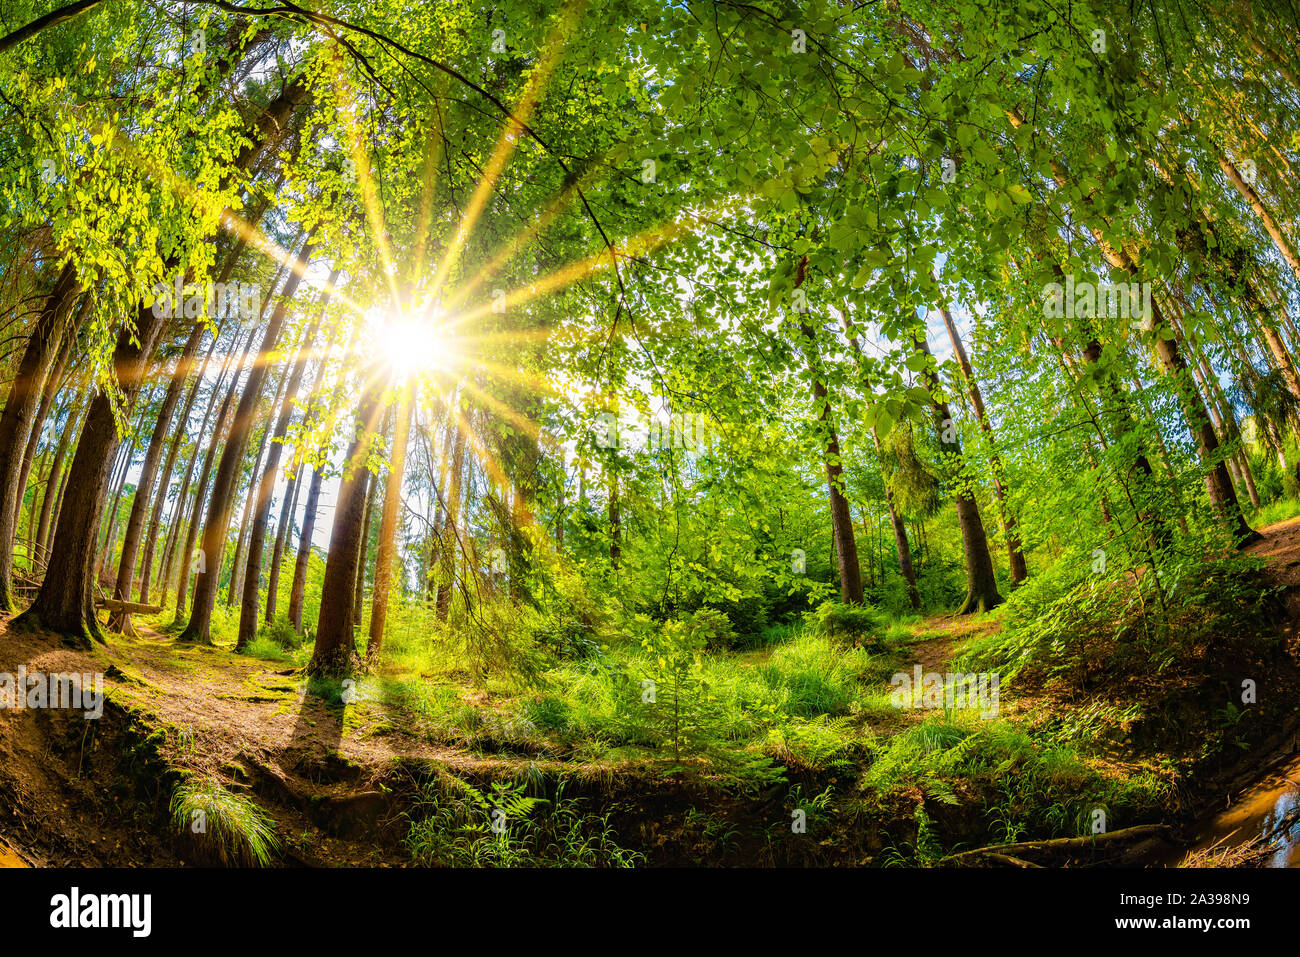 Beautiful forest in summer with bright sun shining through the trees Stock Photo